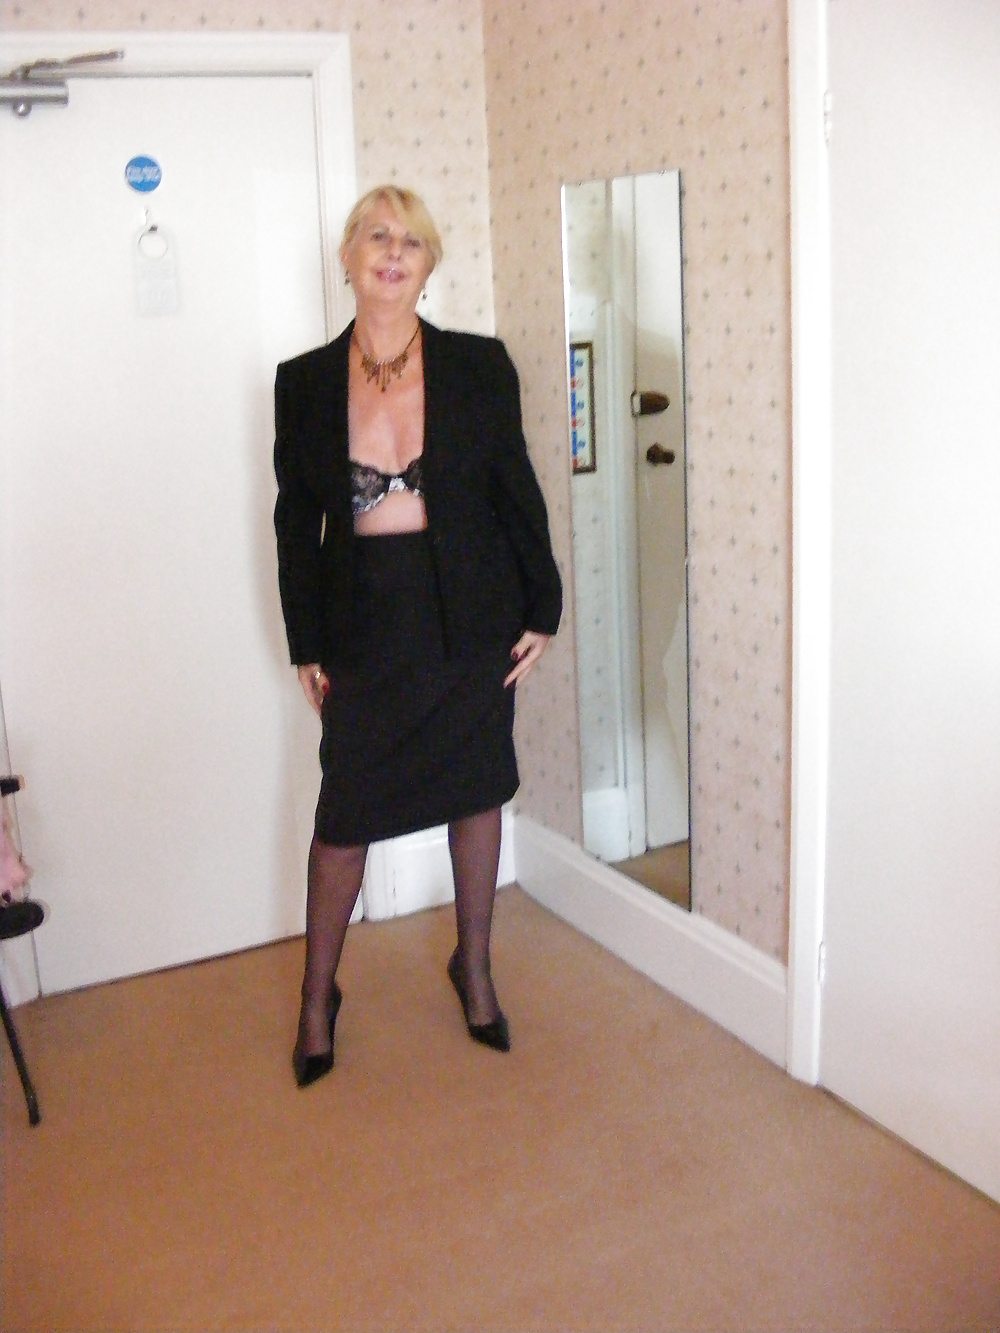 Hot granny's hotel stockings and heels job interview strip! #38631692